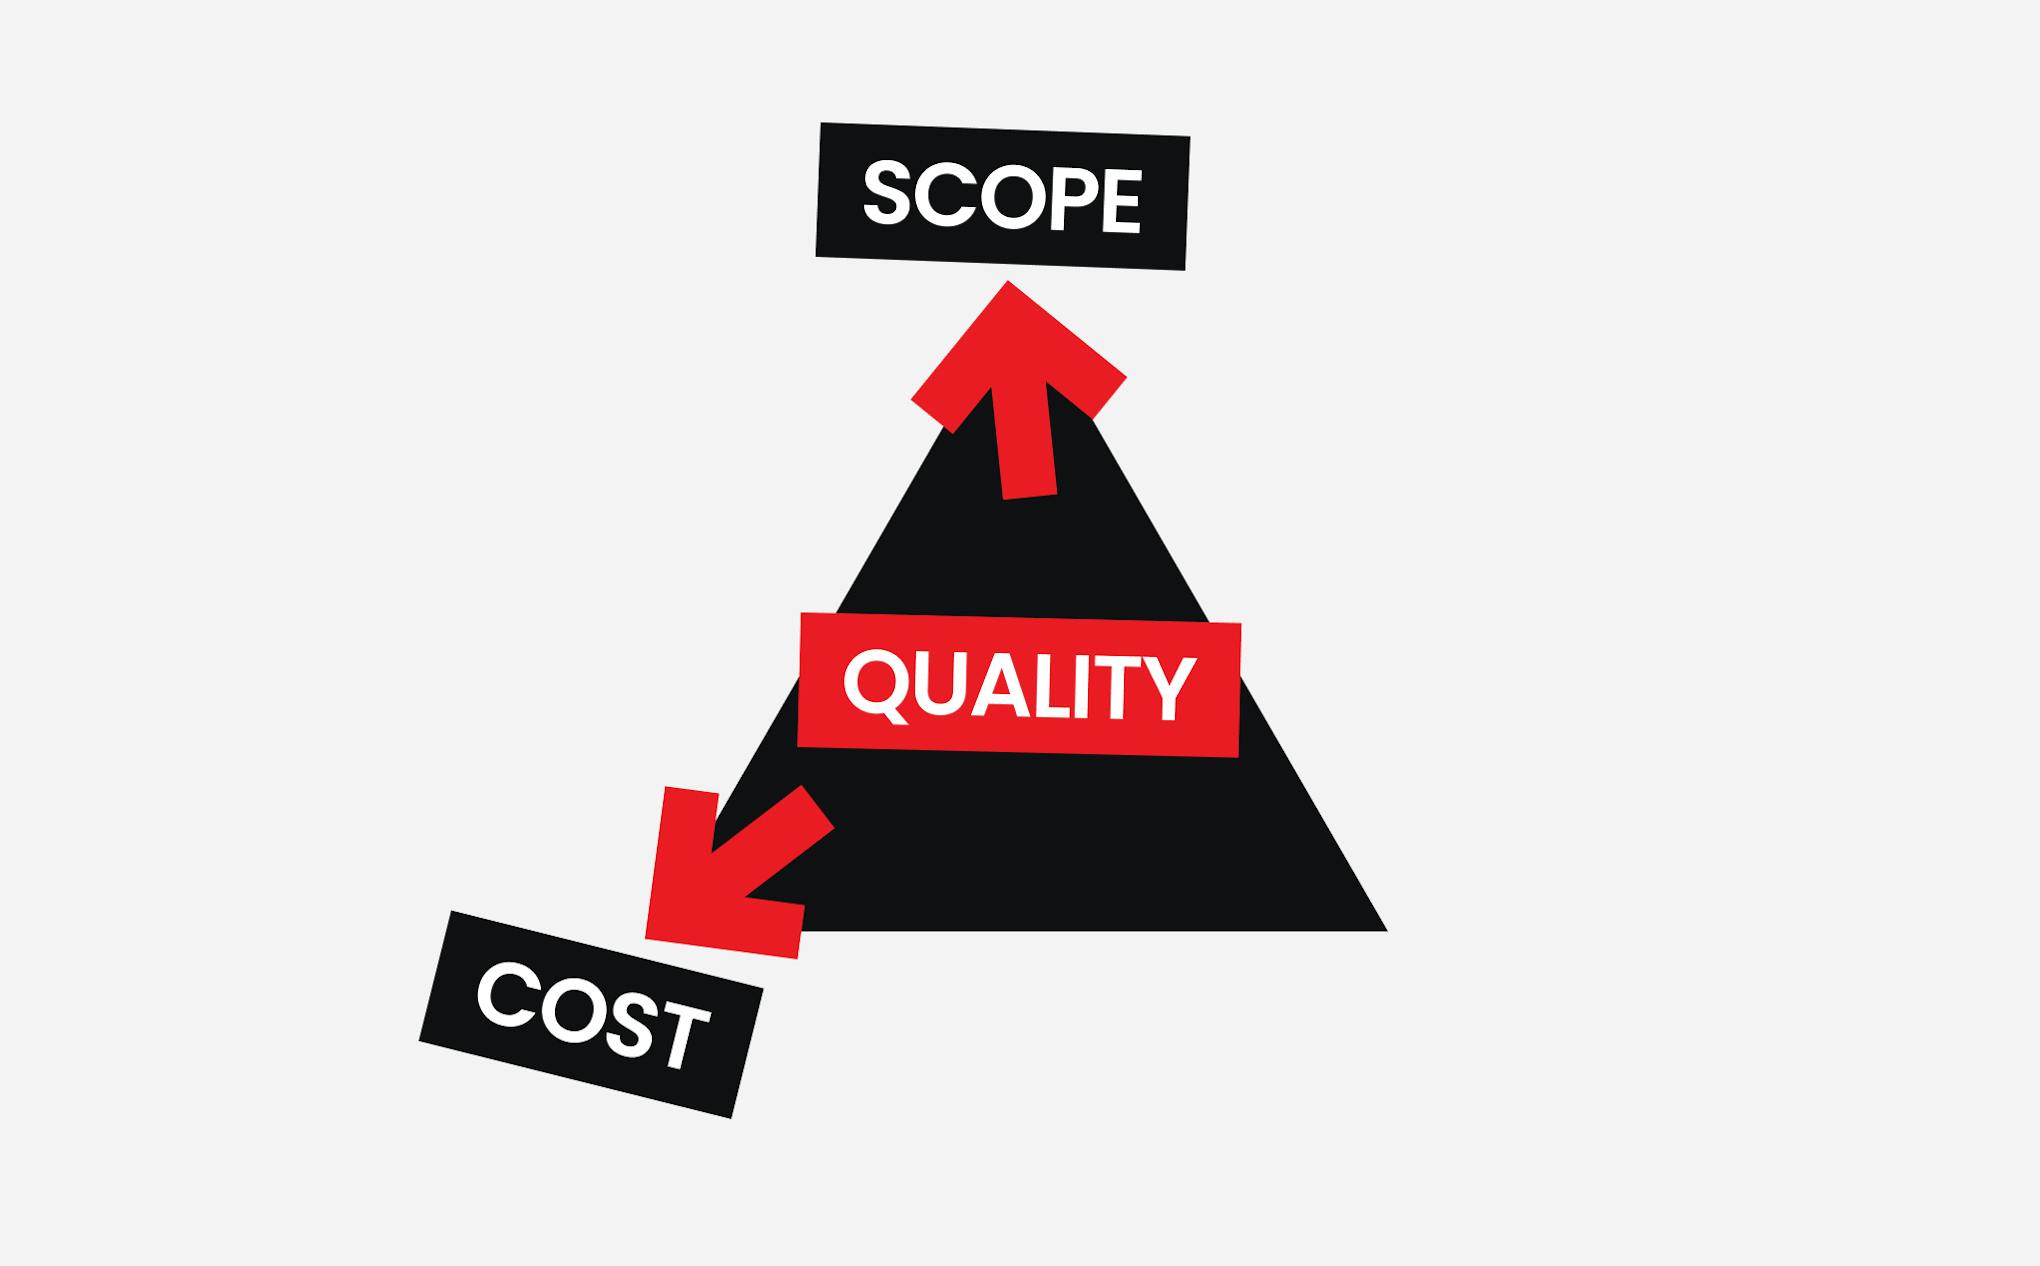 The Quality of Software Development: Scope and Cost.